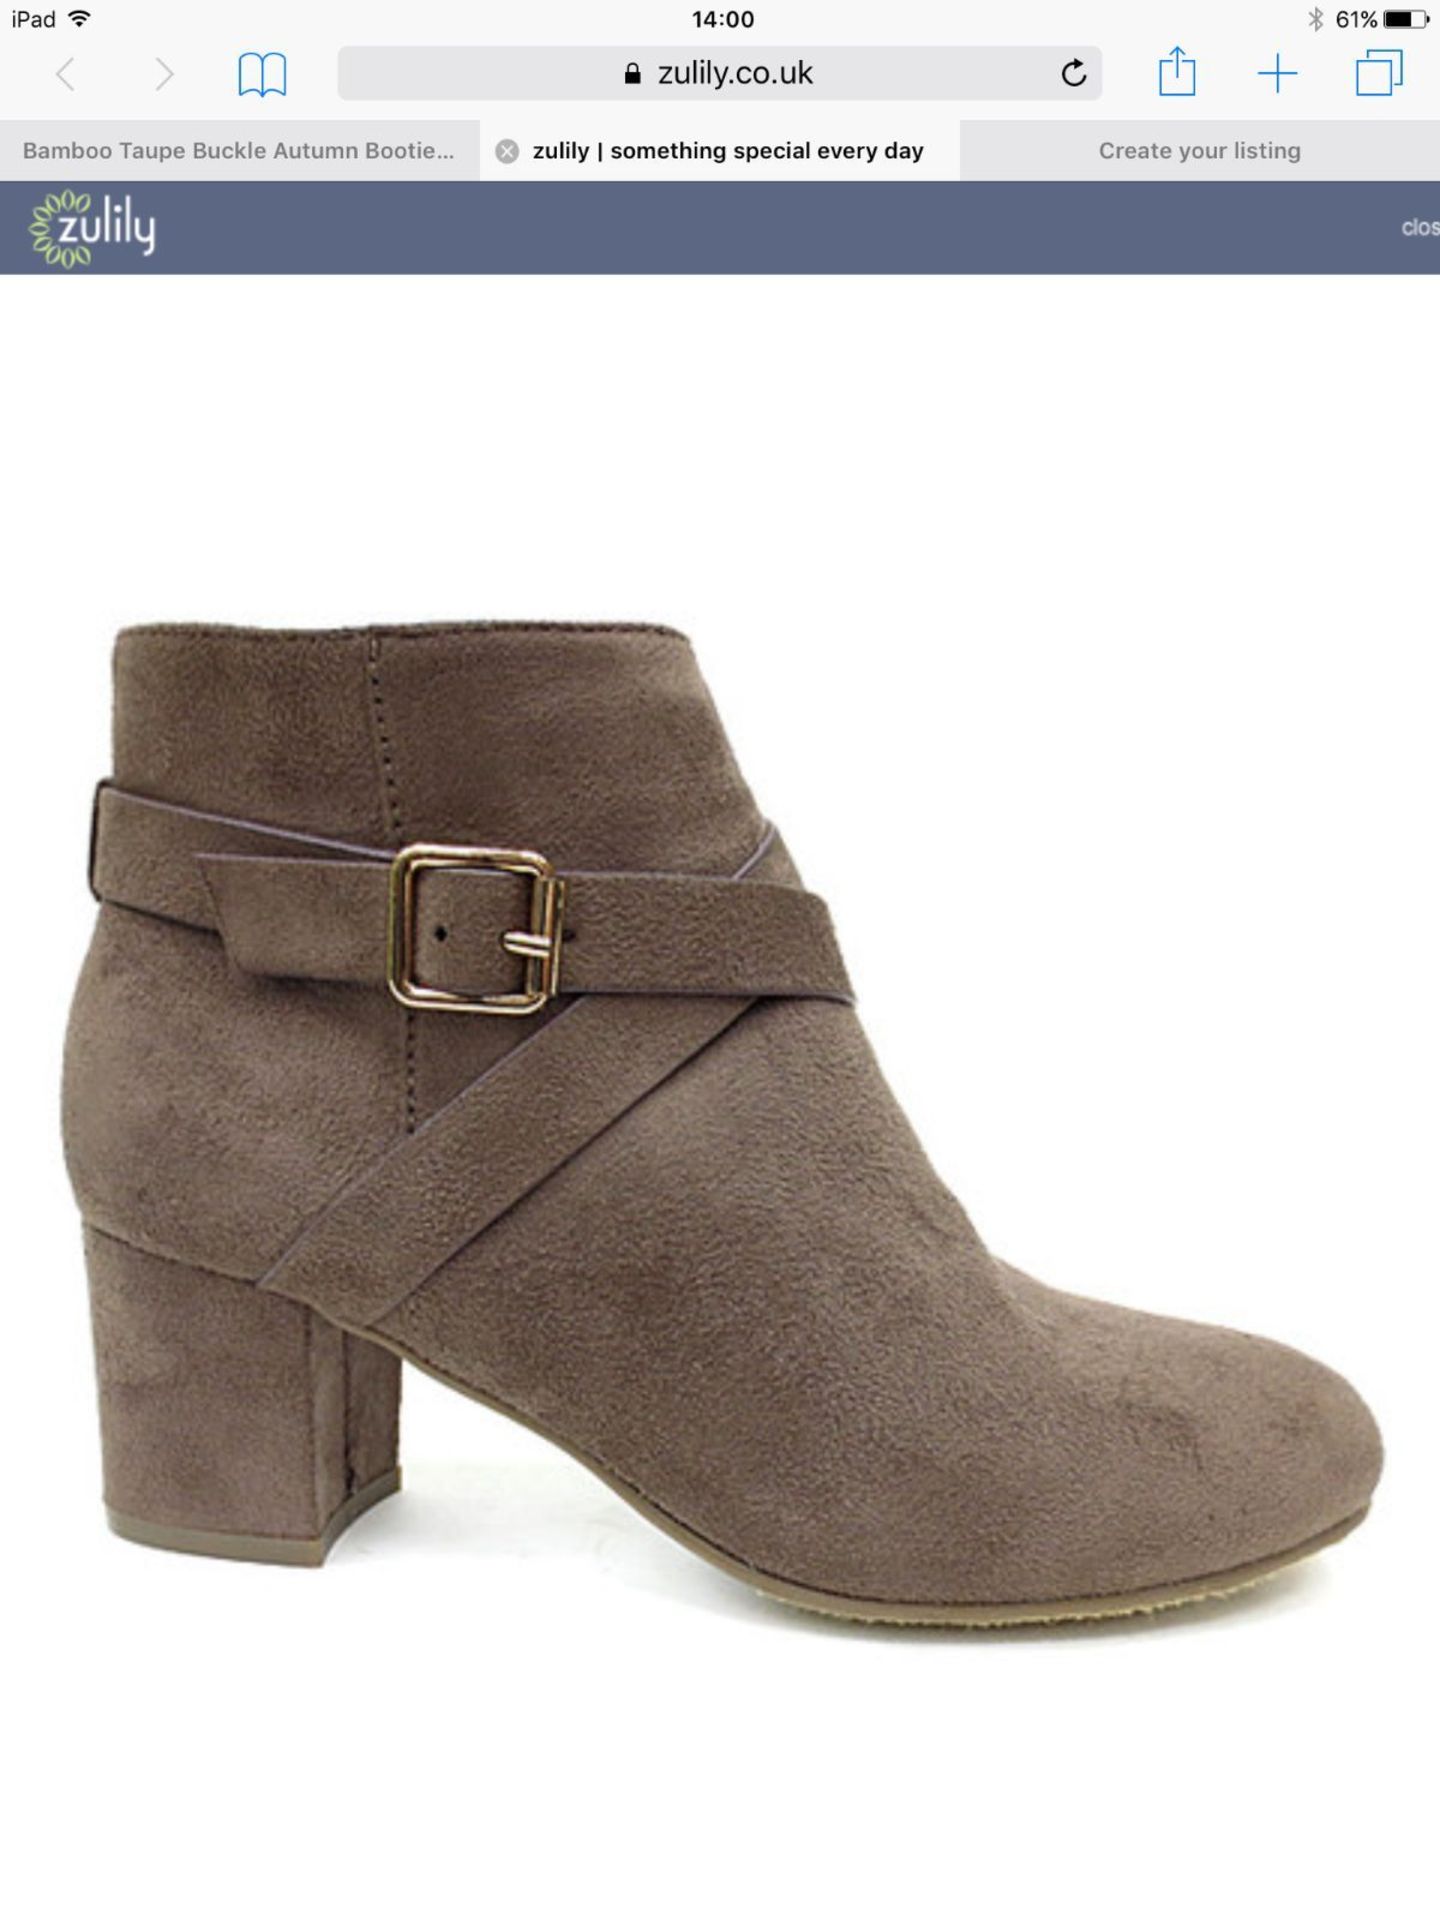 Bamboo Taupe Buckle Autumn Bootie, Size Eur 36, RRP £48.99 (New with box) [Ref: ]